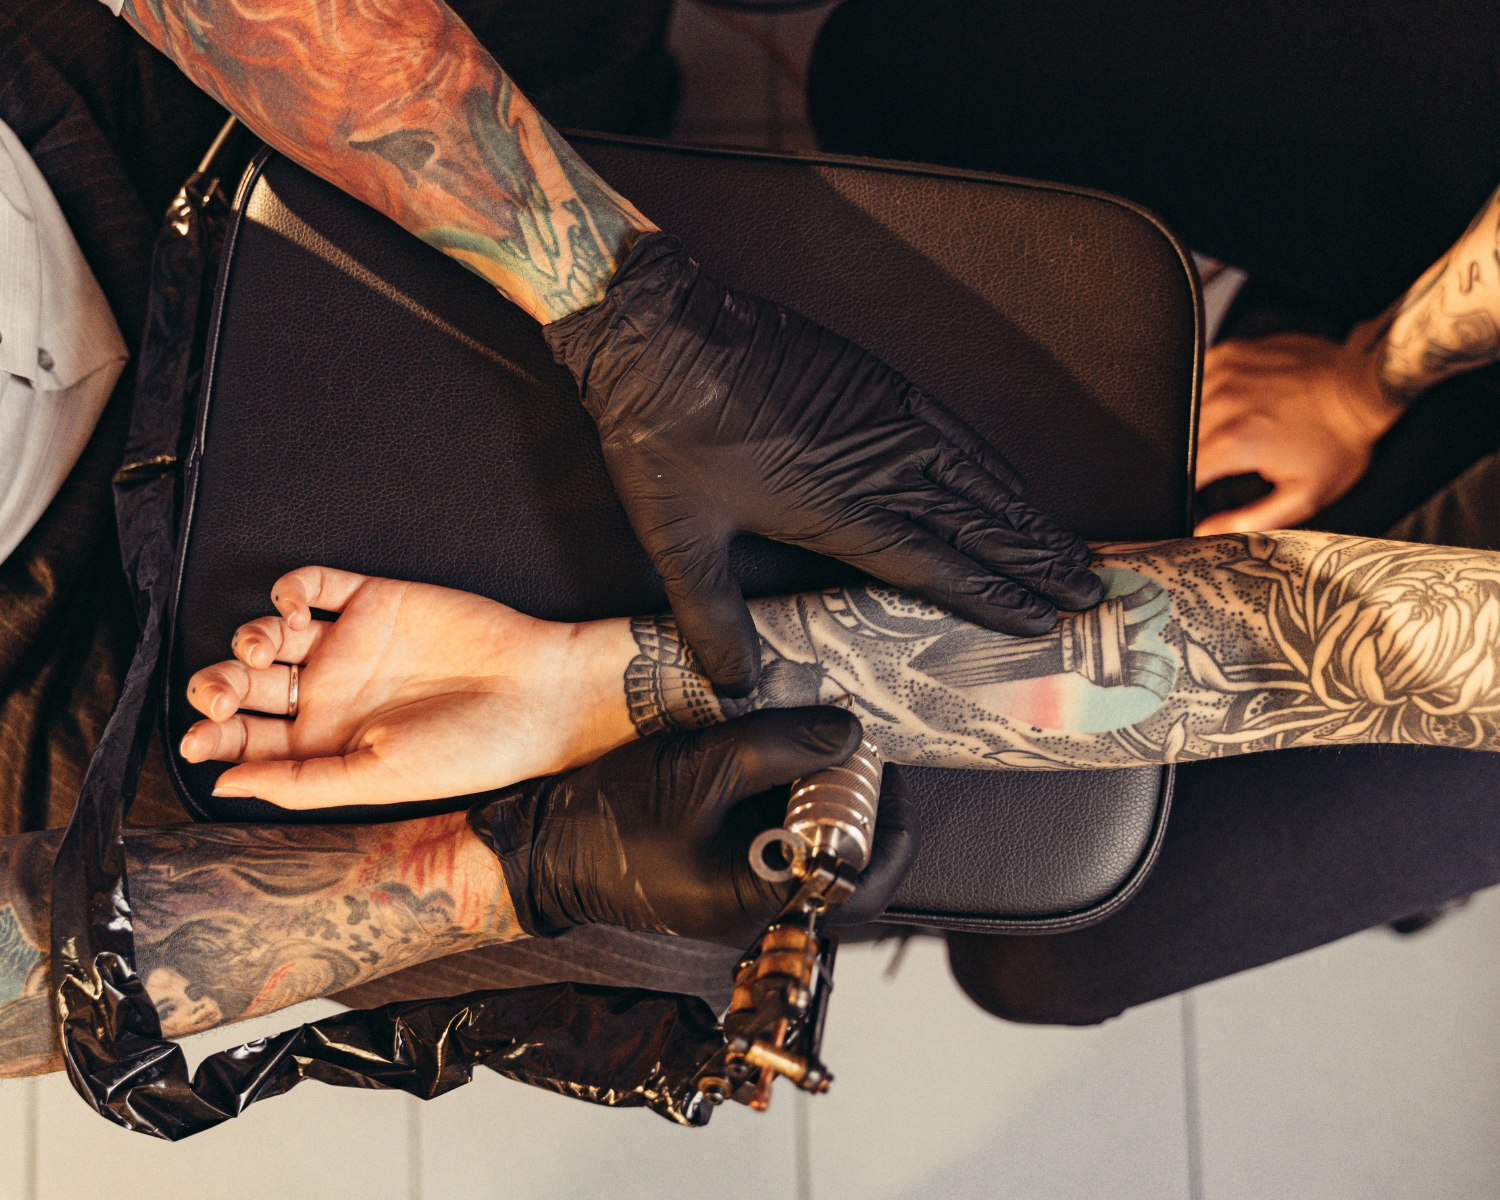 How long does it take to become a tattoo artist?